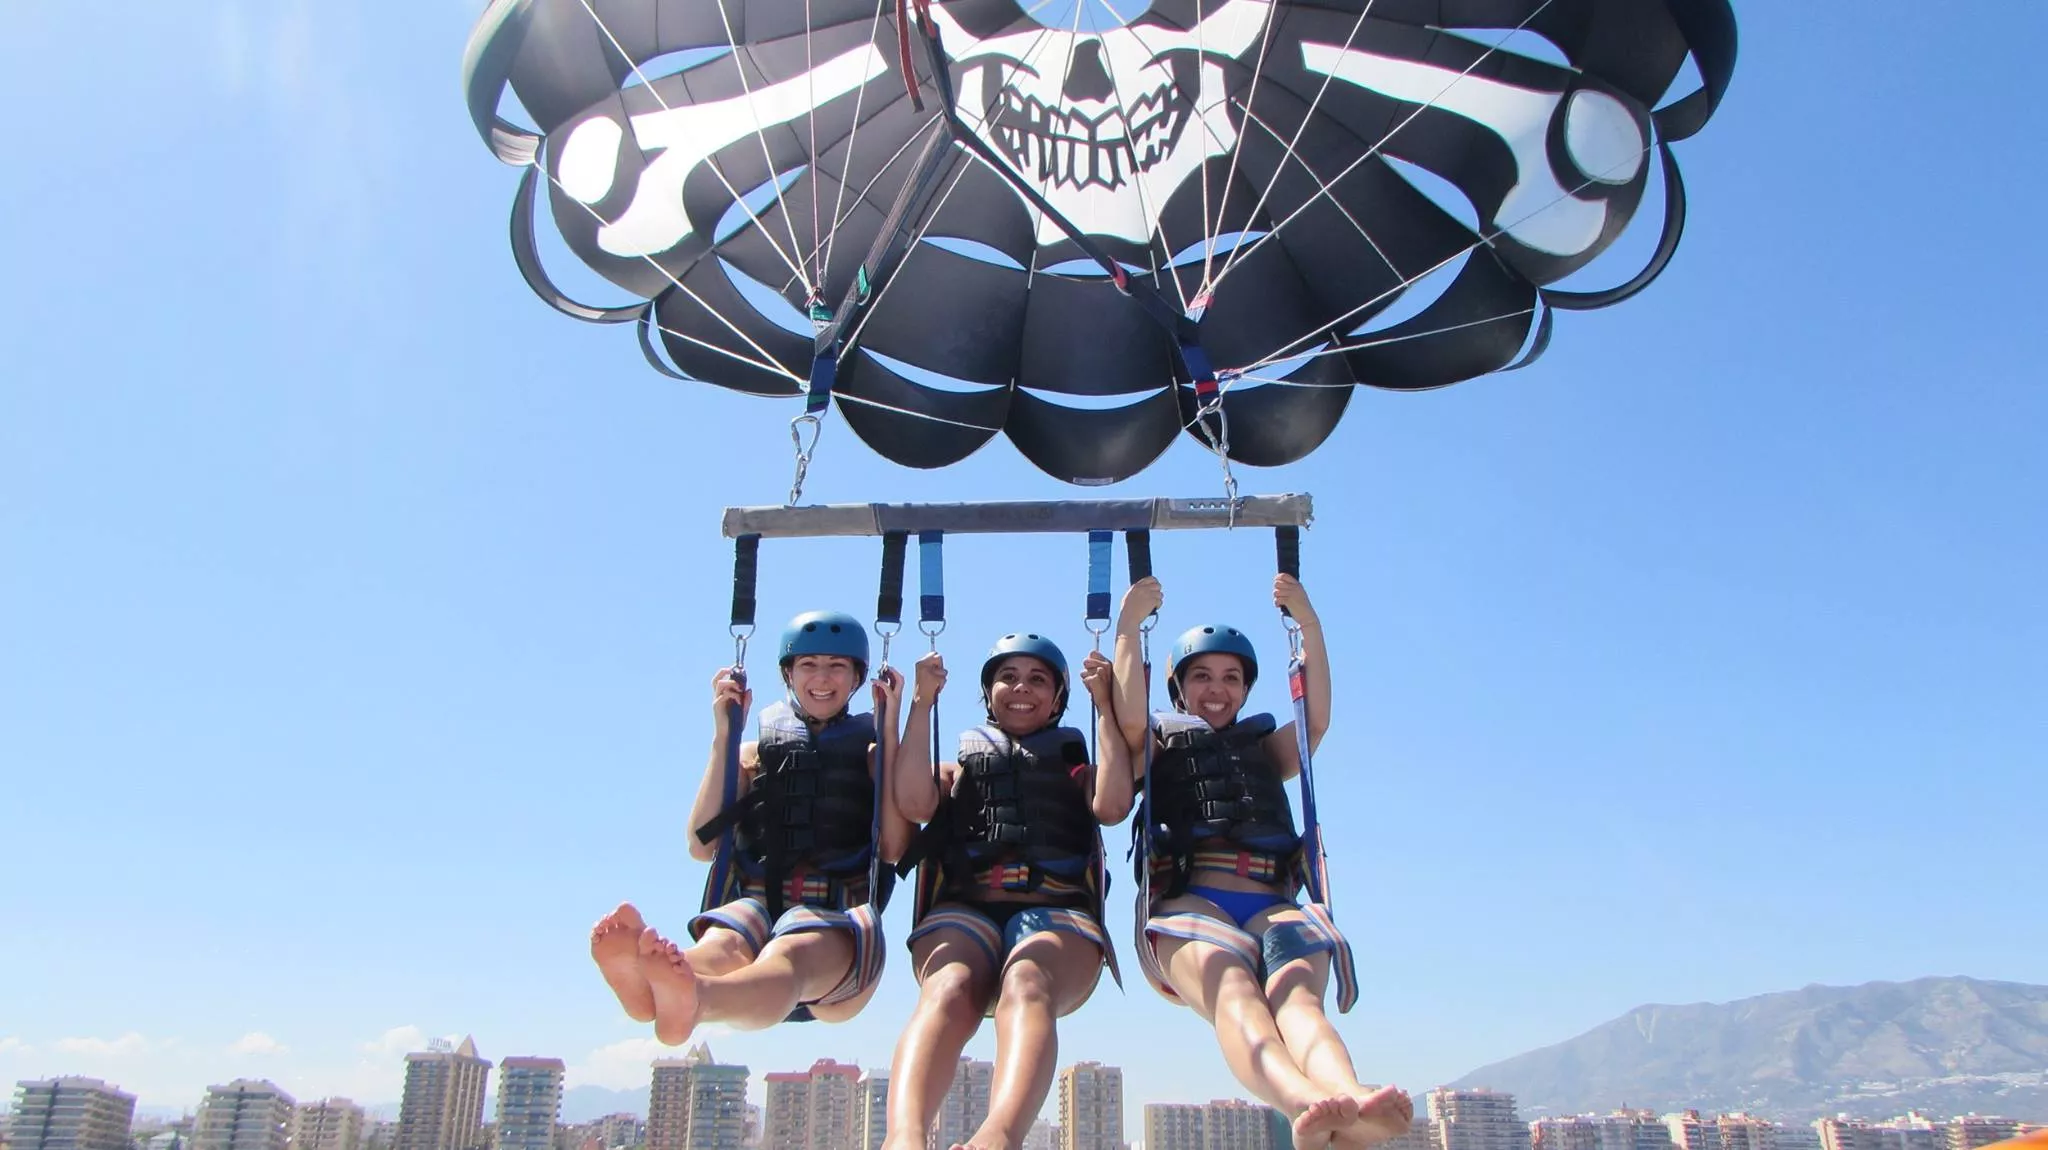 Pirate Parasail in USA, North America | Parasailing - Rated 4.6